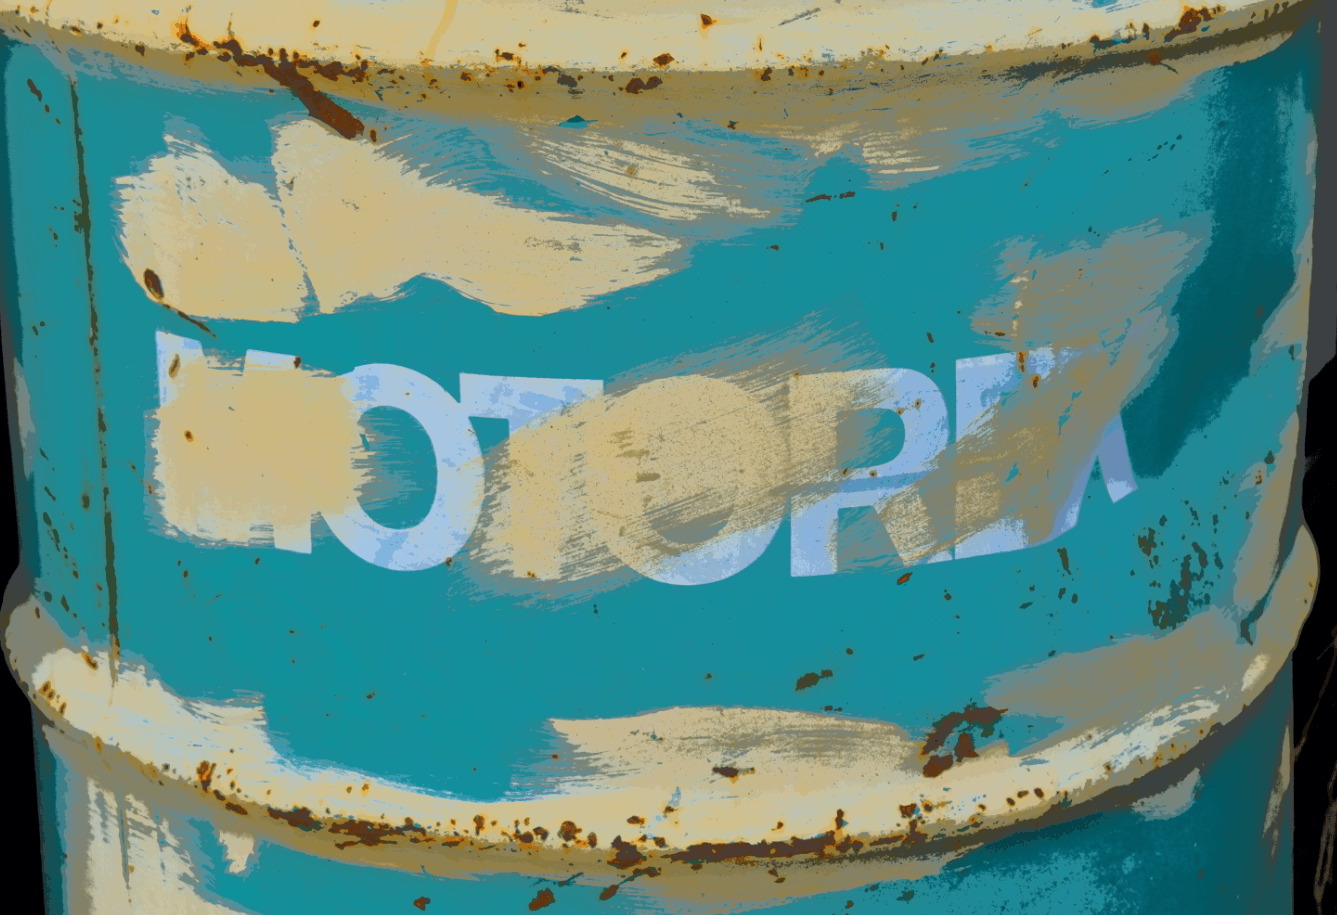 Metal barrel with smudged paint and word MOTOREX